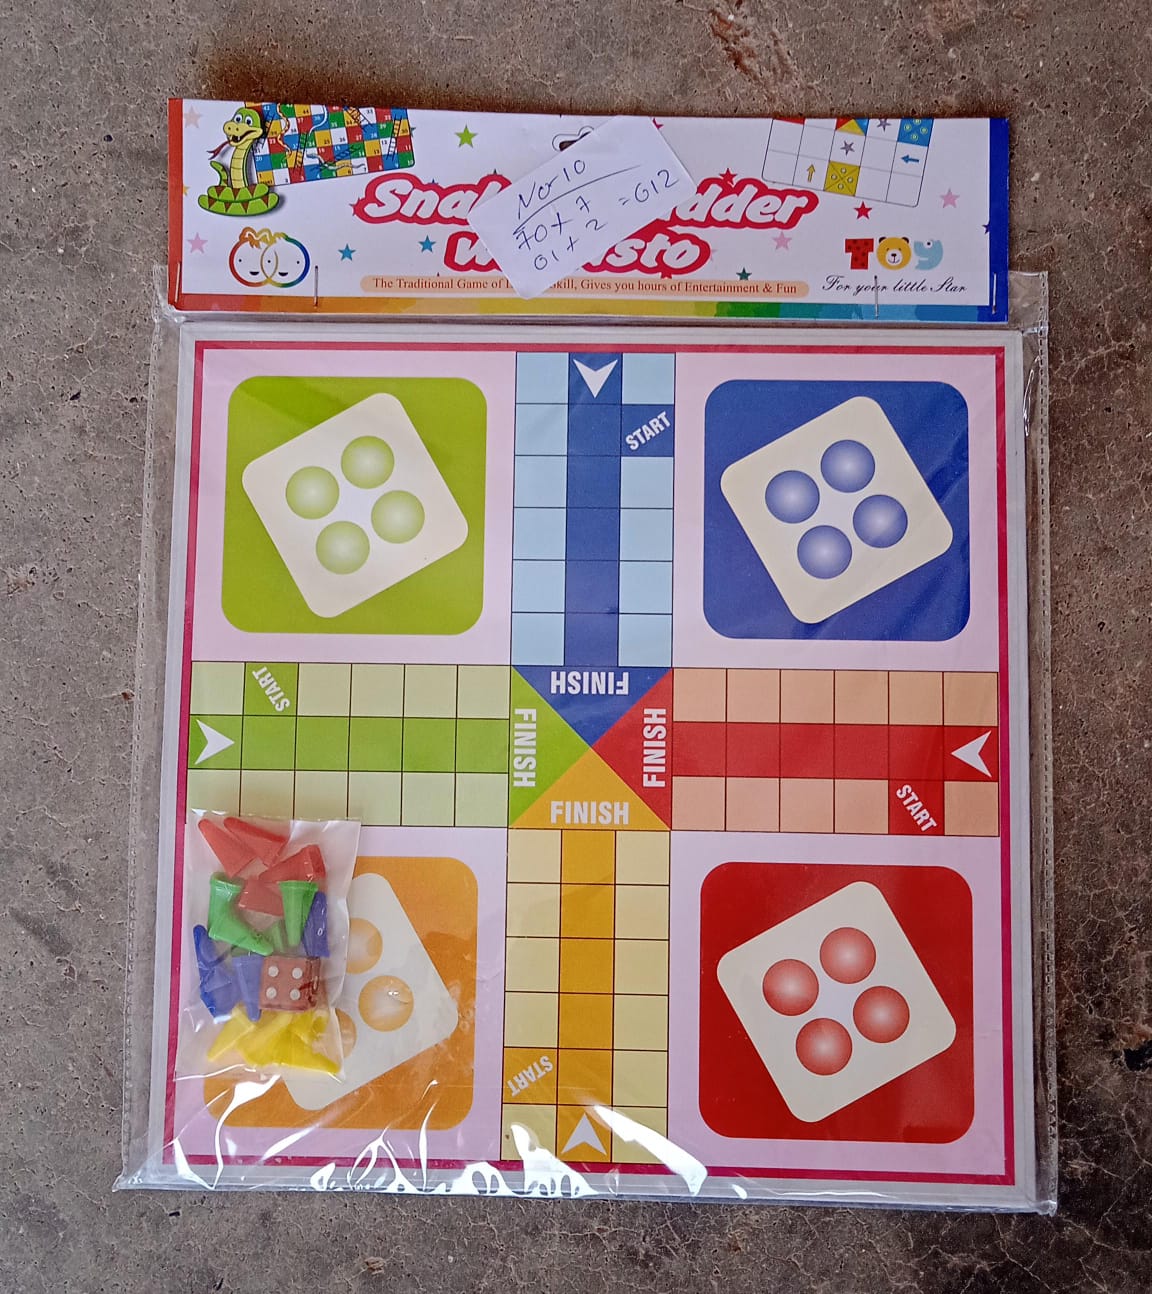 4366 Family Board Game with Two Modes | Two Side Different Ladder, Ludo  Games for Children and Families | 2 to 4 Players - Age 3 Years and Above (2 in 1)